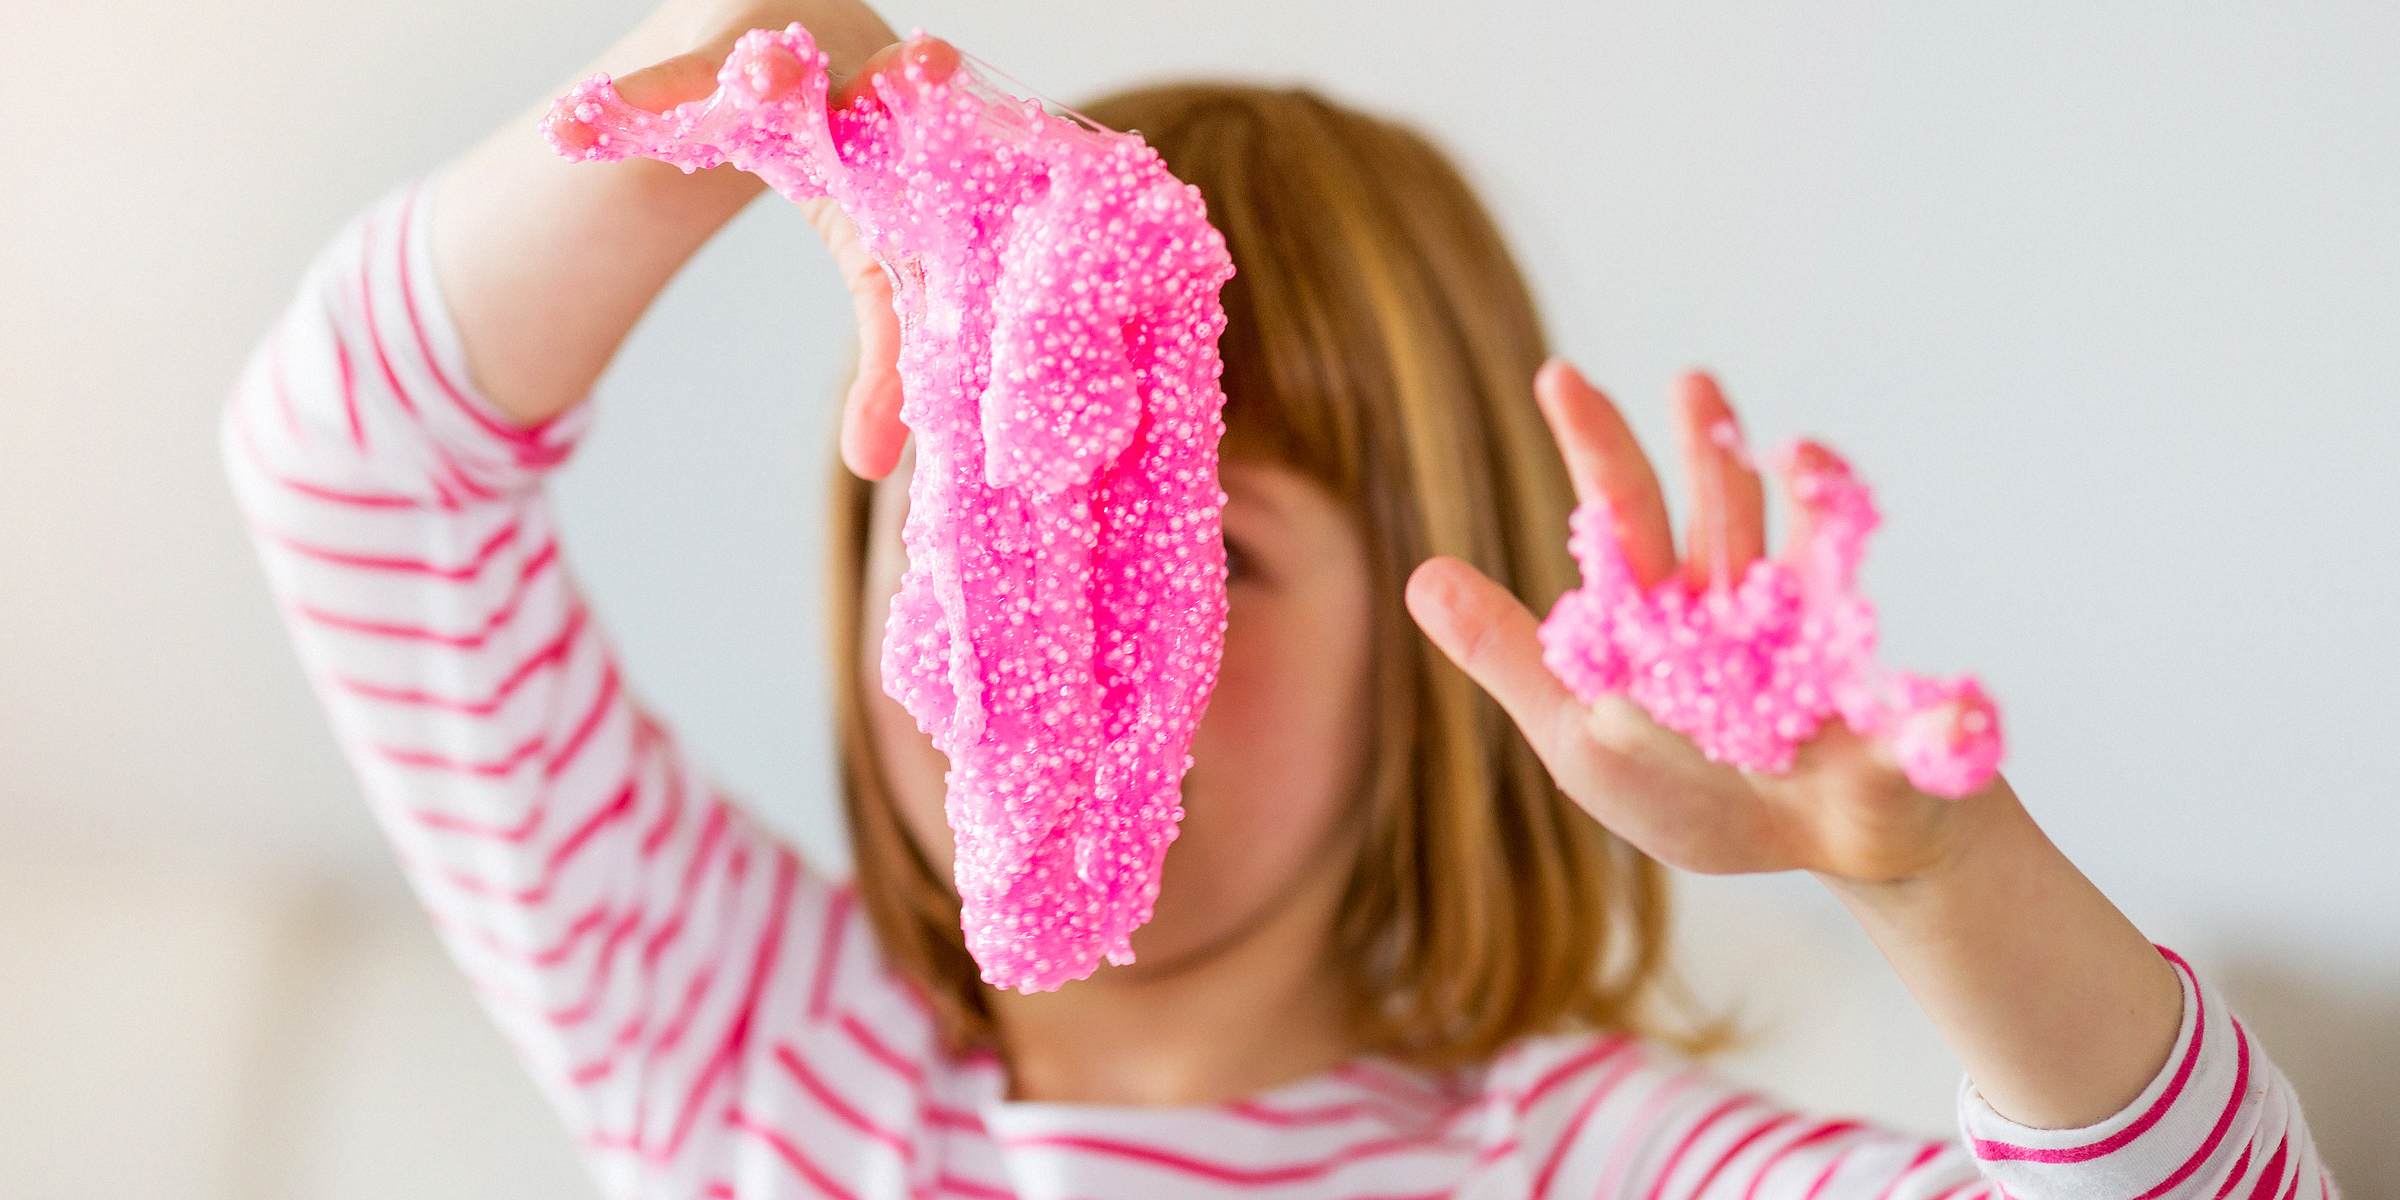 A little girl playing with pink slime | Source: Shutterstock